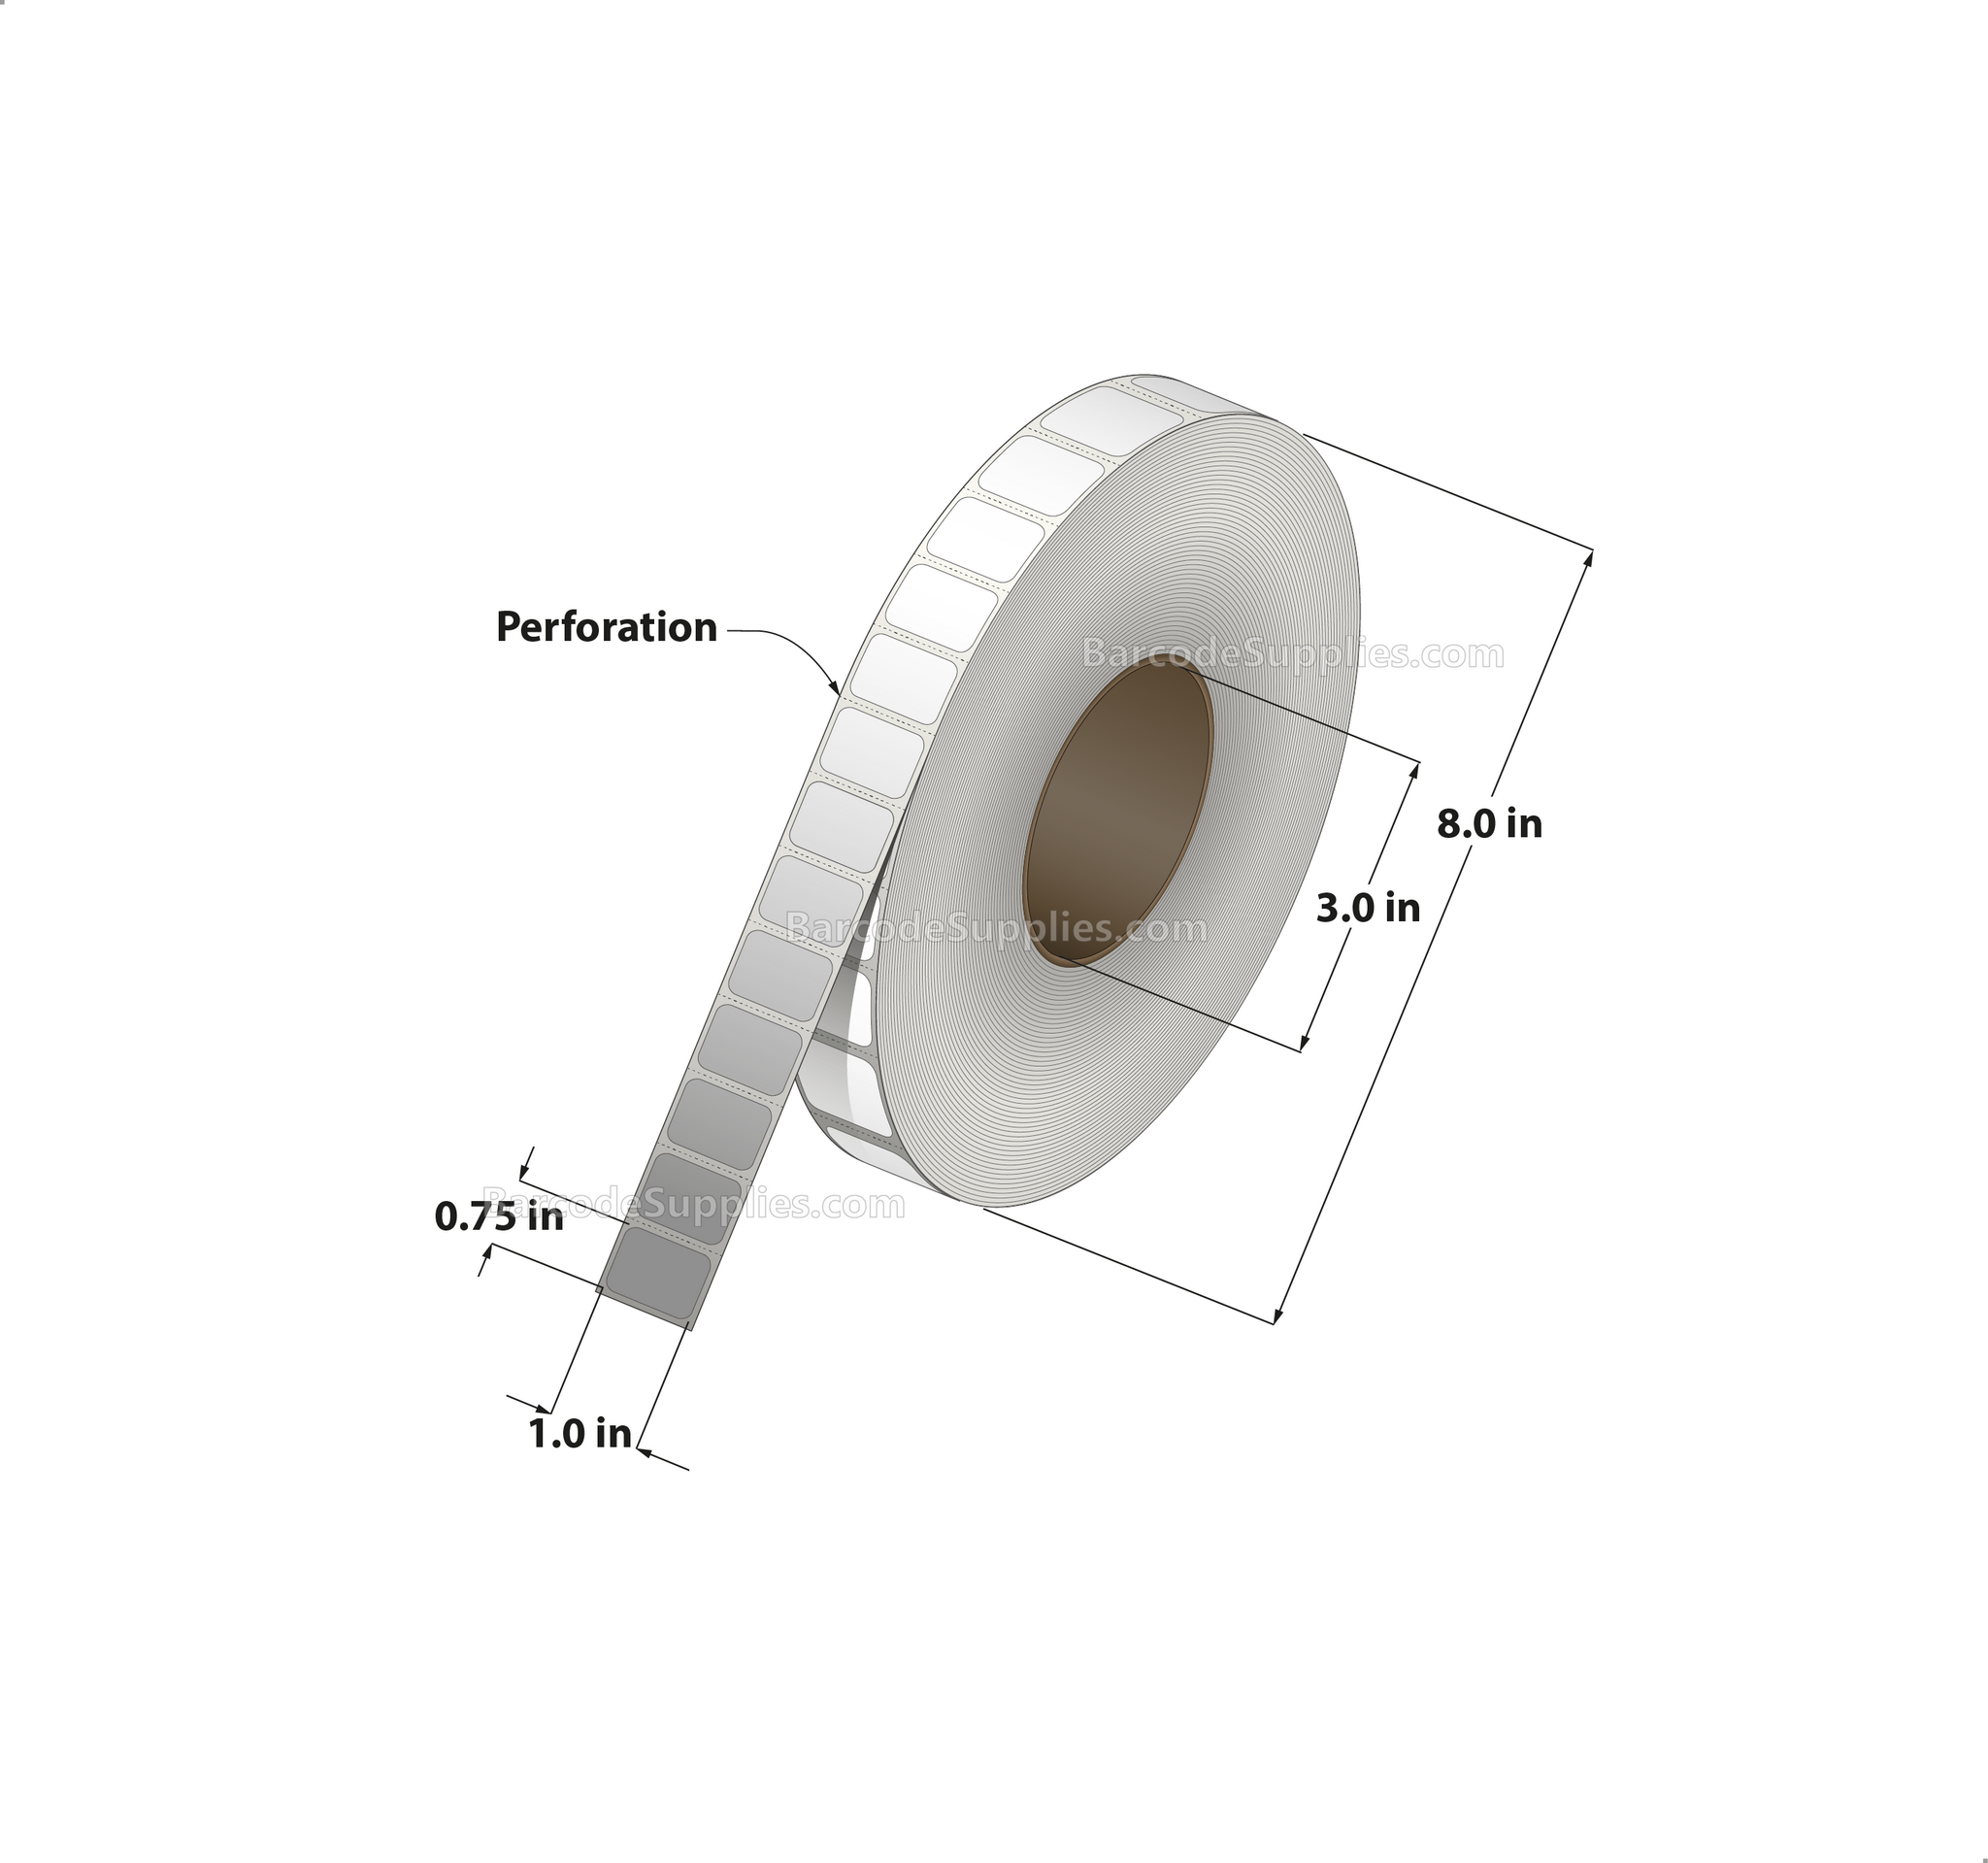 1 x 0.75 Thermal Transfer White Labels With Permanent Adhesive - Perforated - 7500 Labels Per Roll - Carton Of 8 Rolls - 60000 Labels Total - MPN: RT-1-075-7500-3